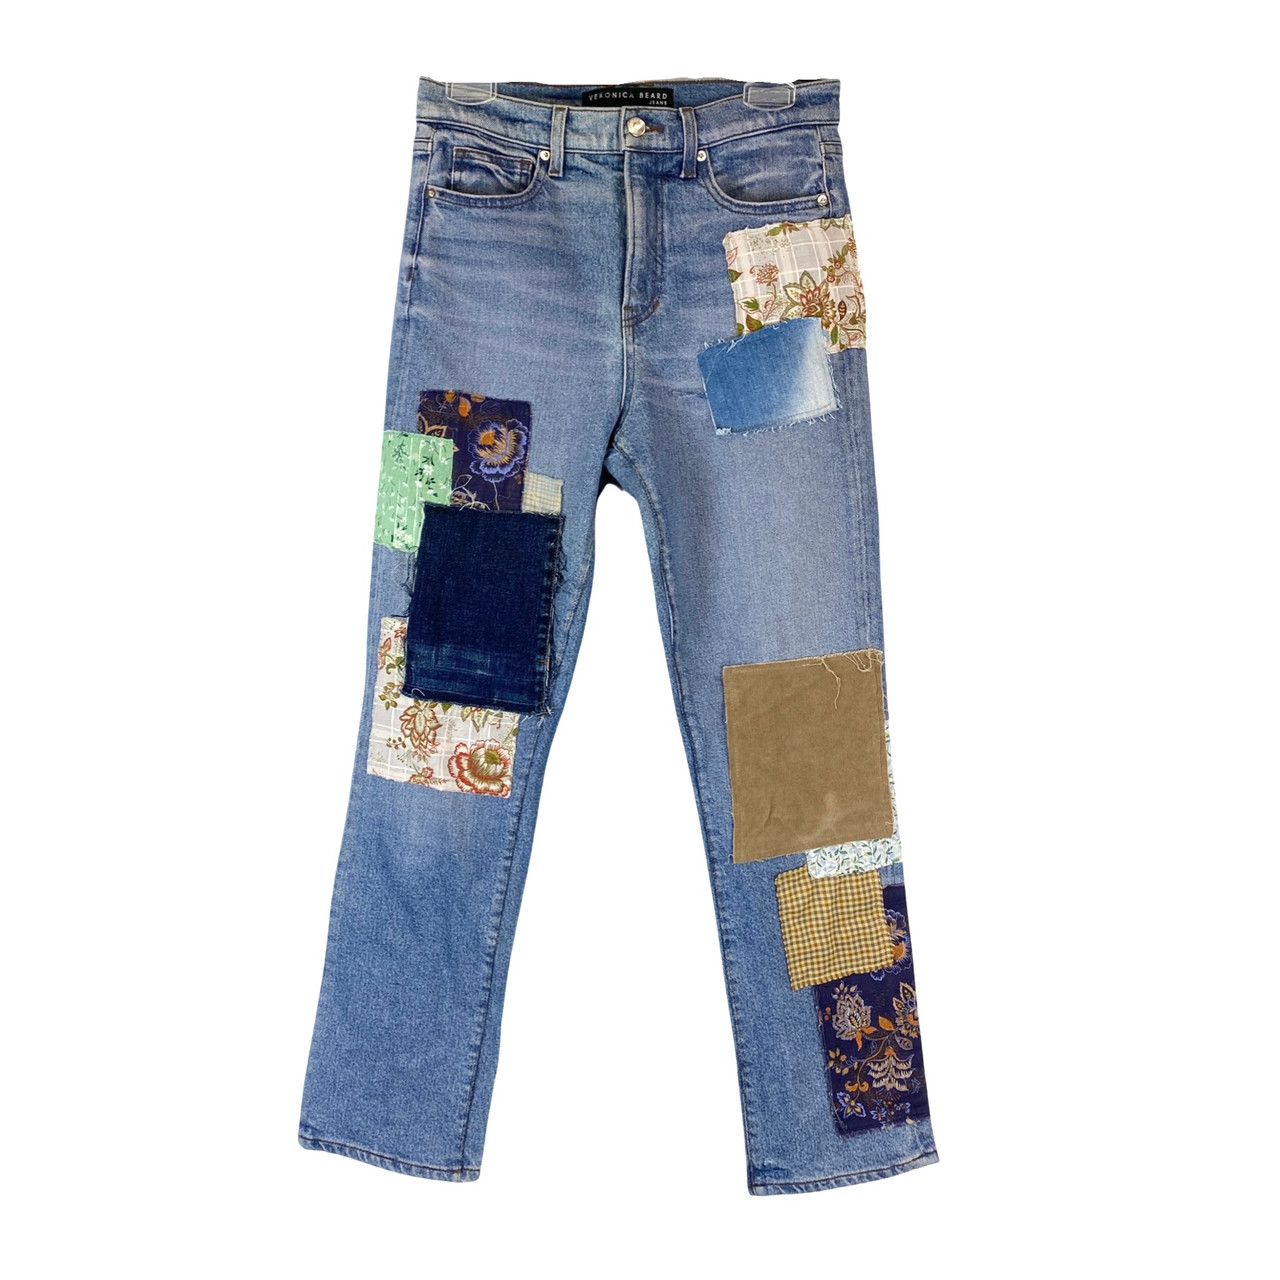 Image of Veronica Beard Patchwork Jeans